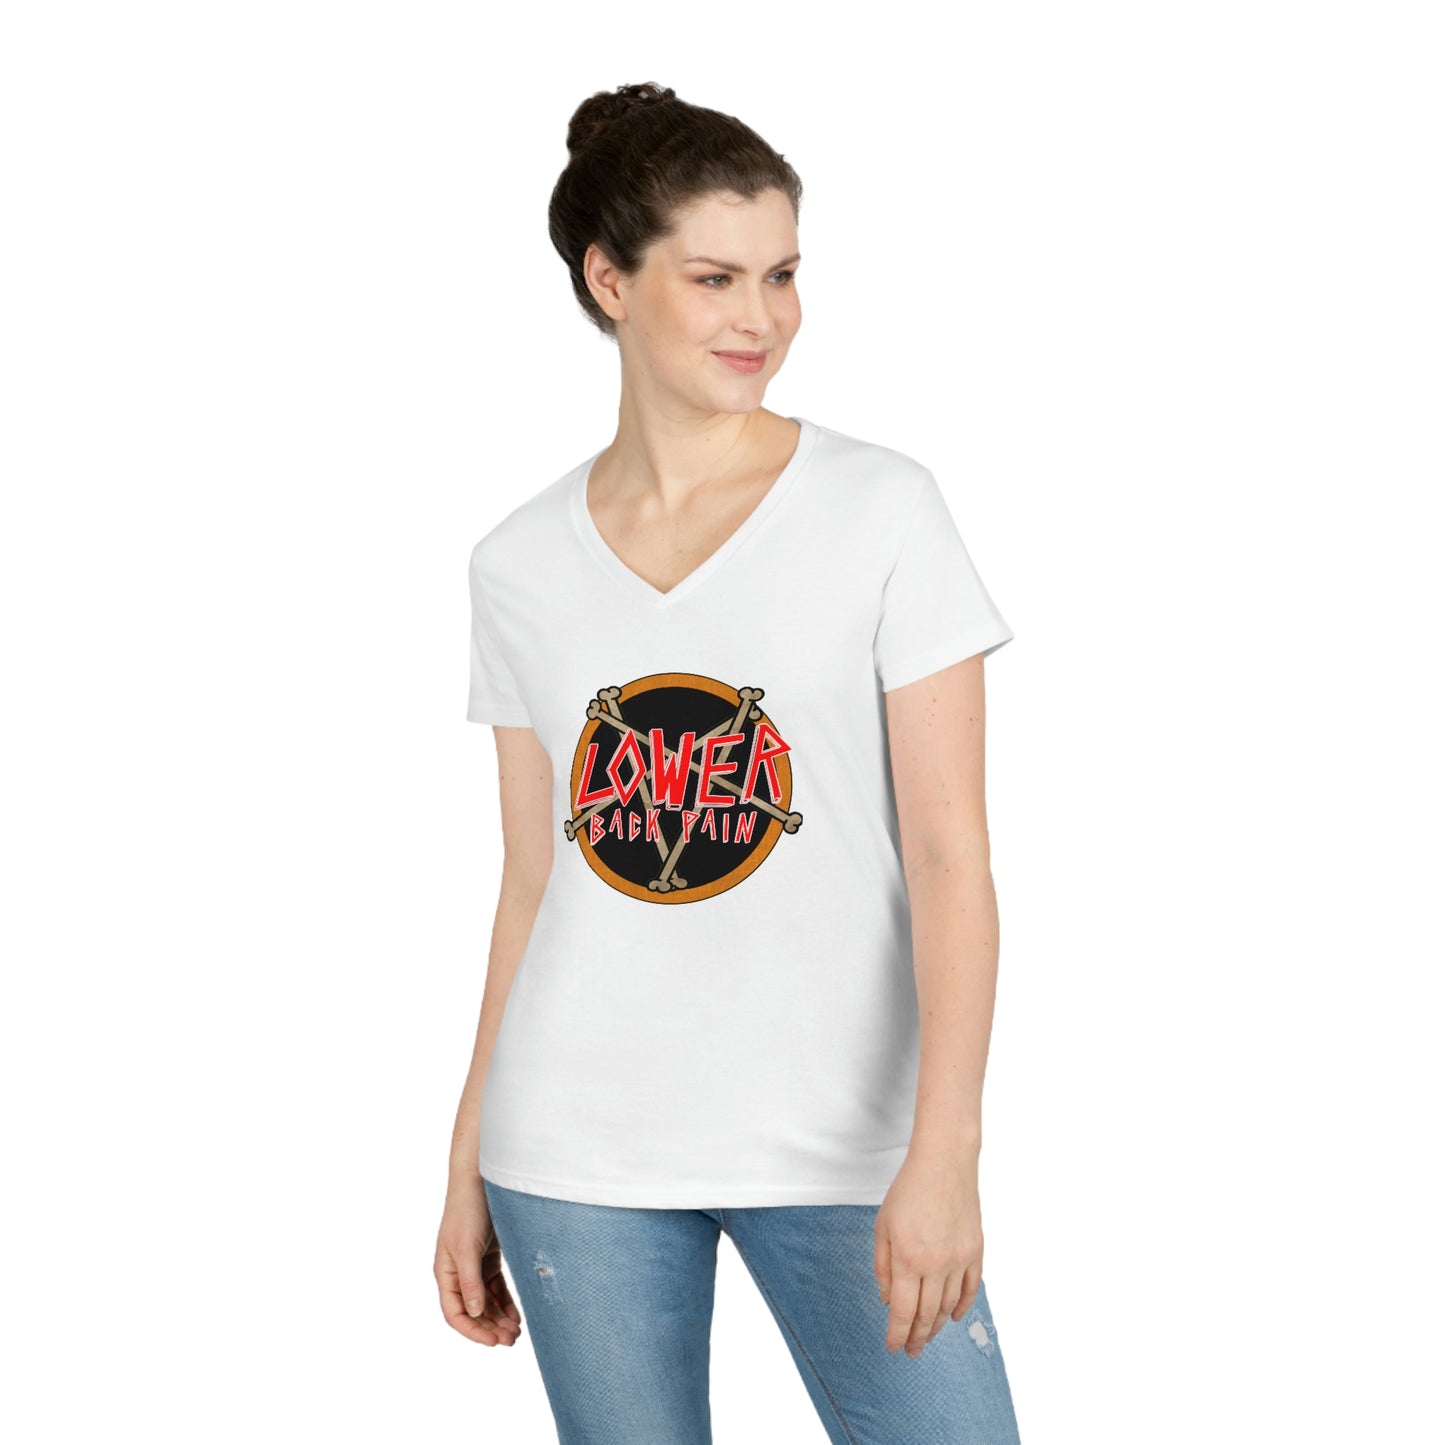 Seasons in the Spinal Disc V neck Shirt